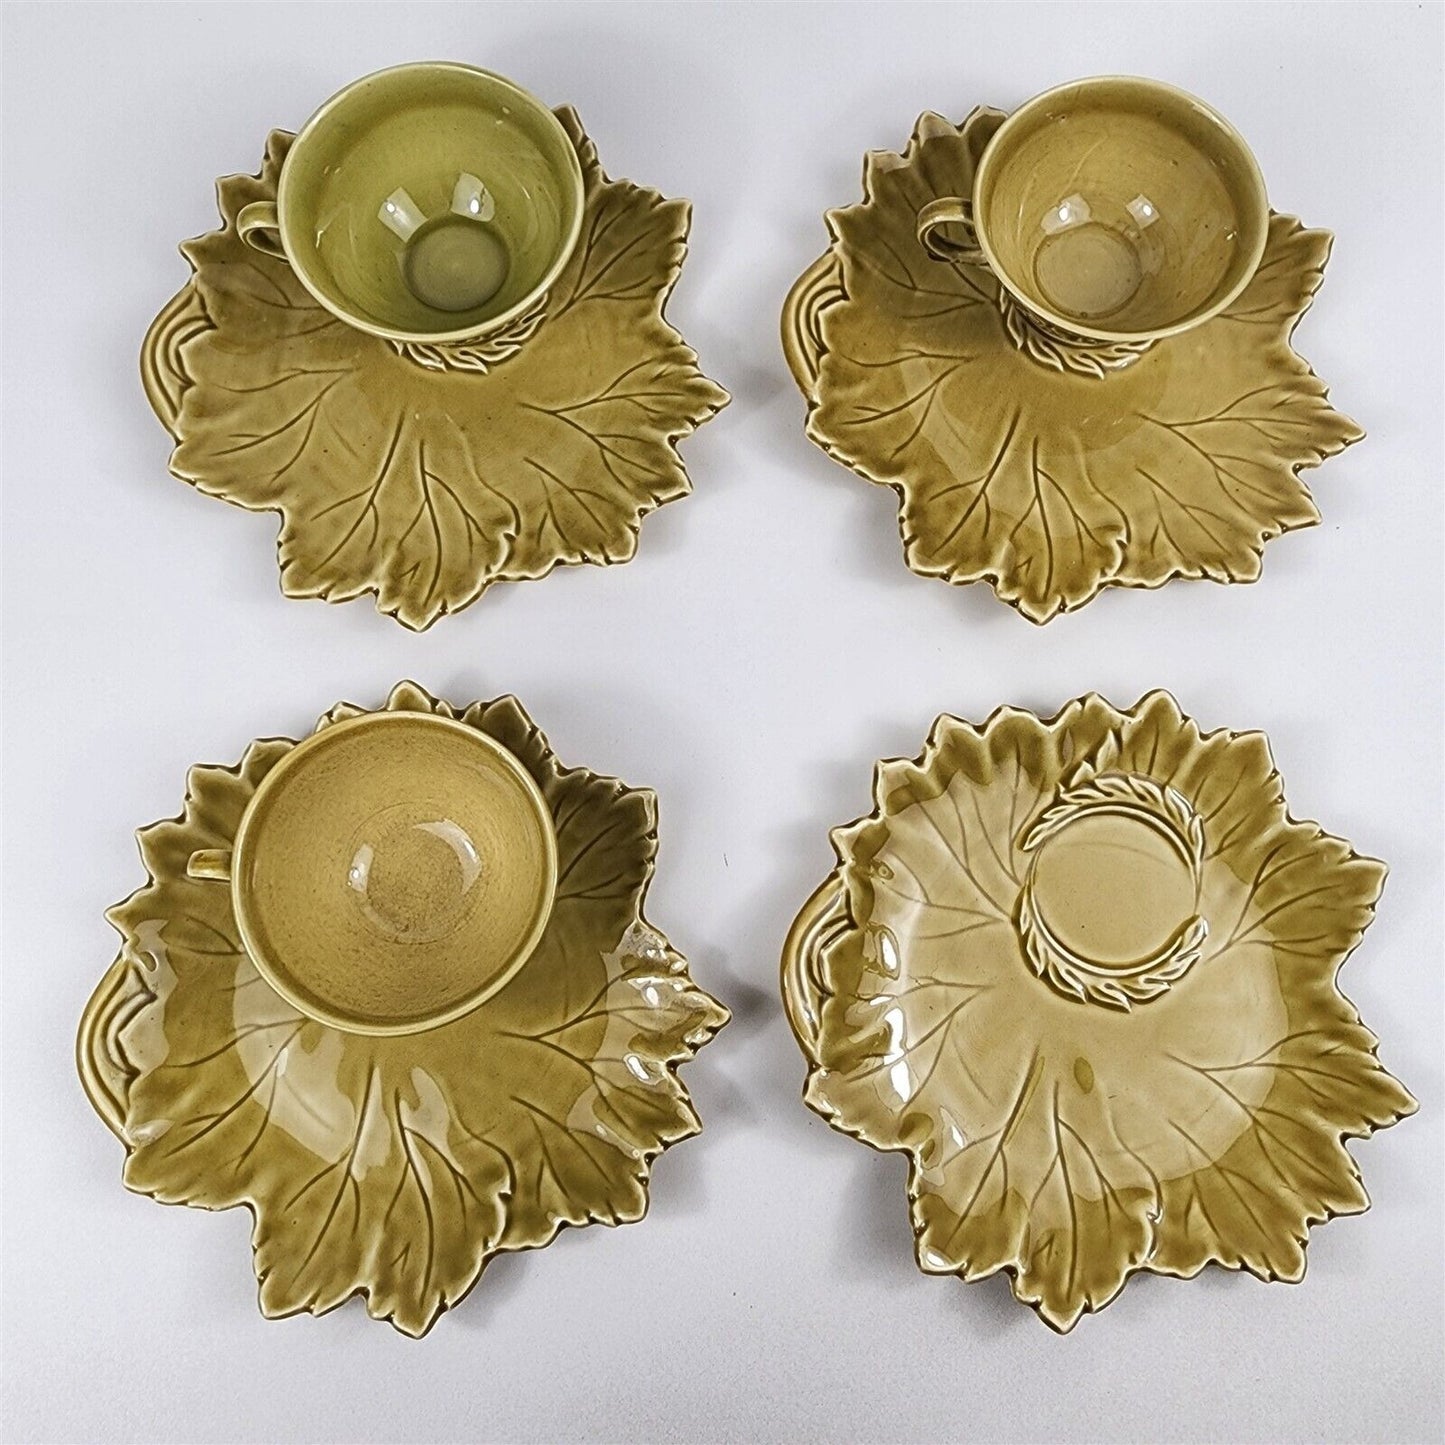 7 Pc Woodfield Steubenville Golden Fawn Green Leaf Snack Tea Set 3 Cups 4 Plates